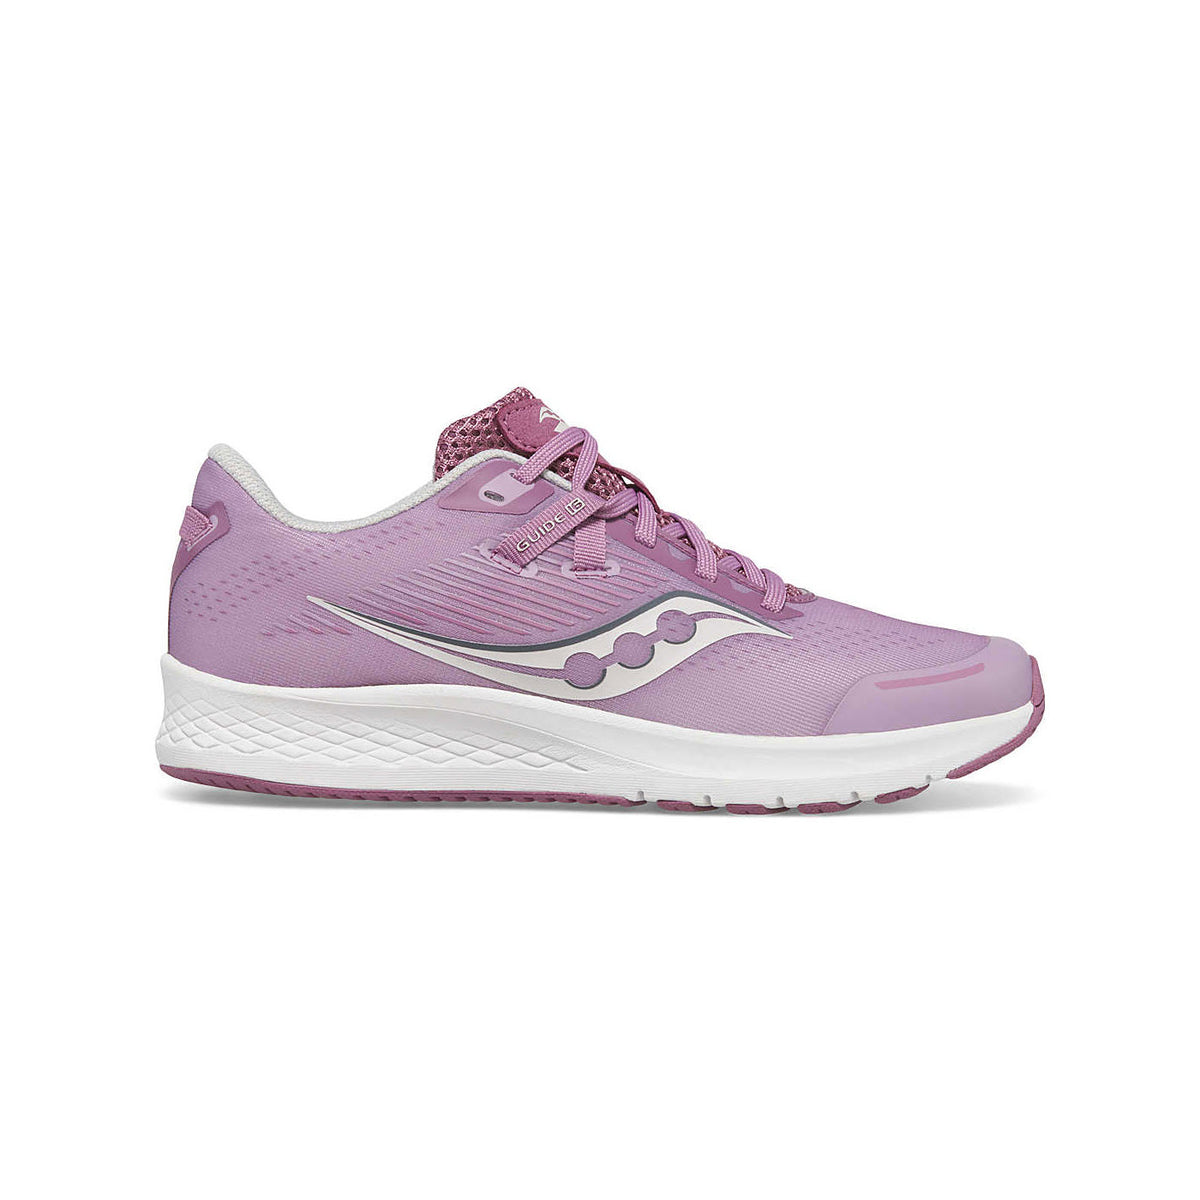 A single light purple Saucony Guide 16 Orchid kids road sneaker with white soles and dynamic geometric designs, viewed from the side.